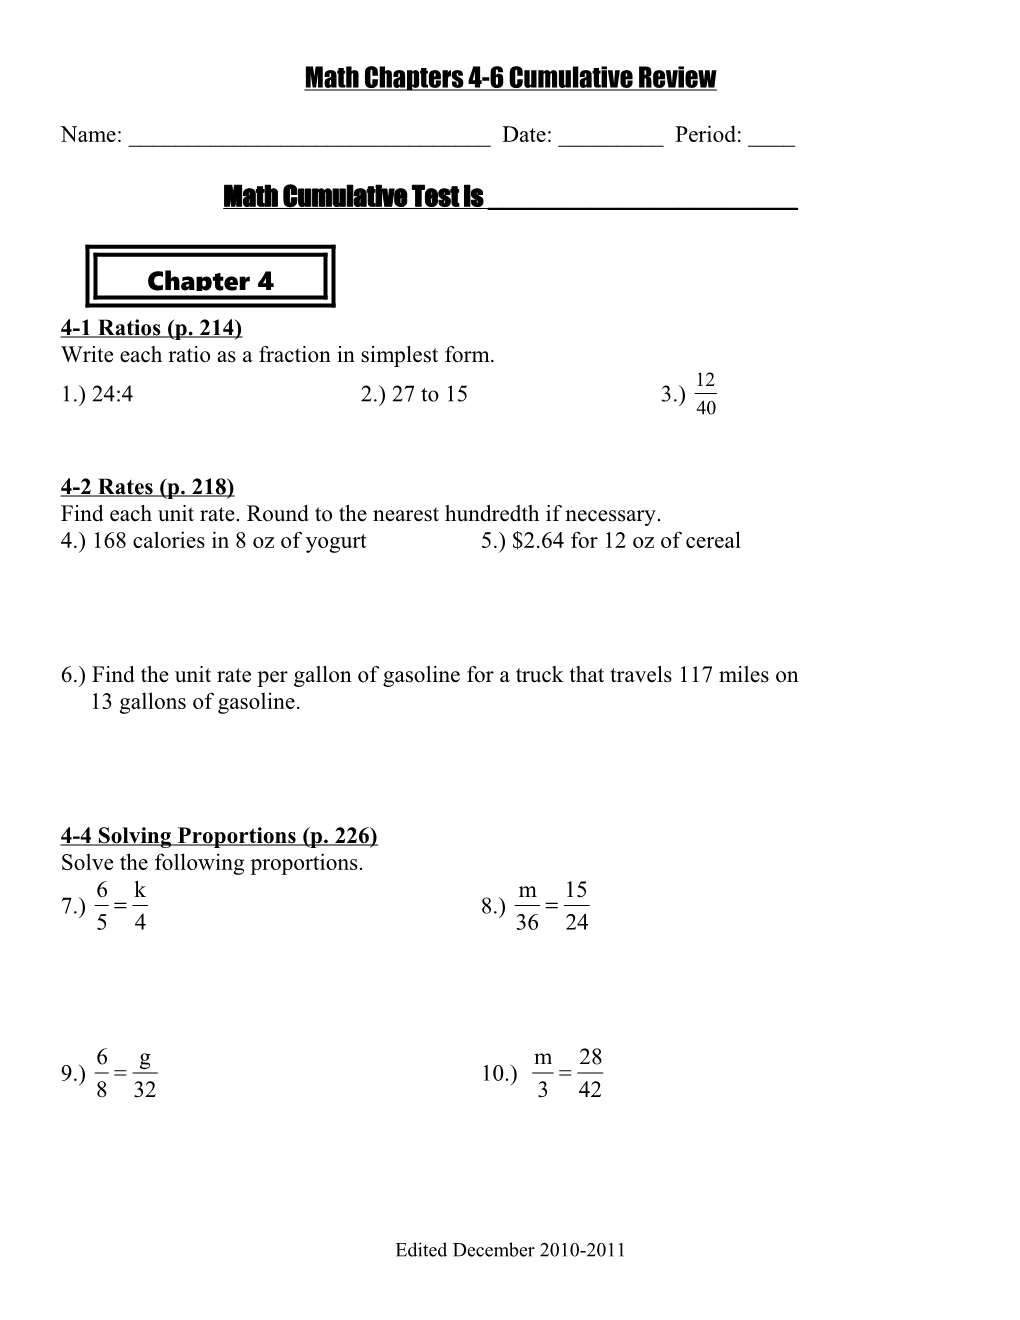 Math Chapters 4-6 Cumulative Review